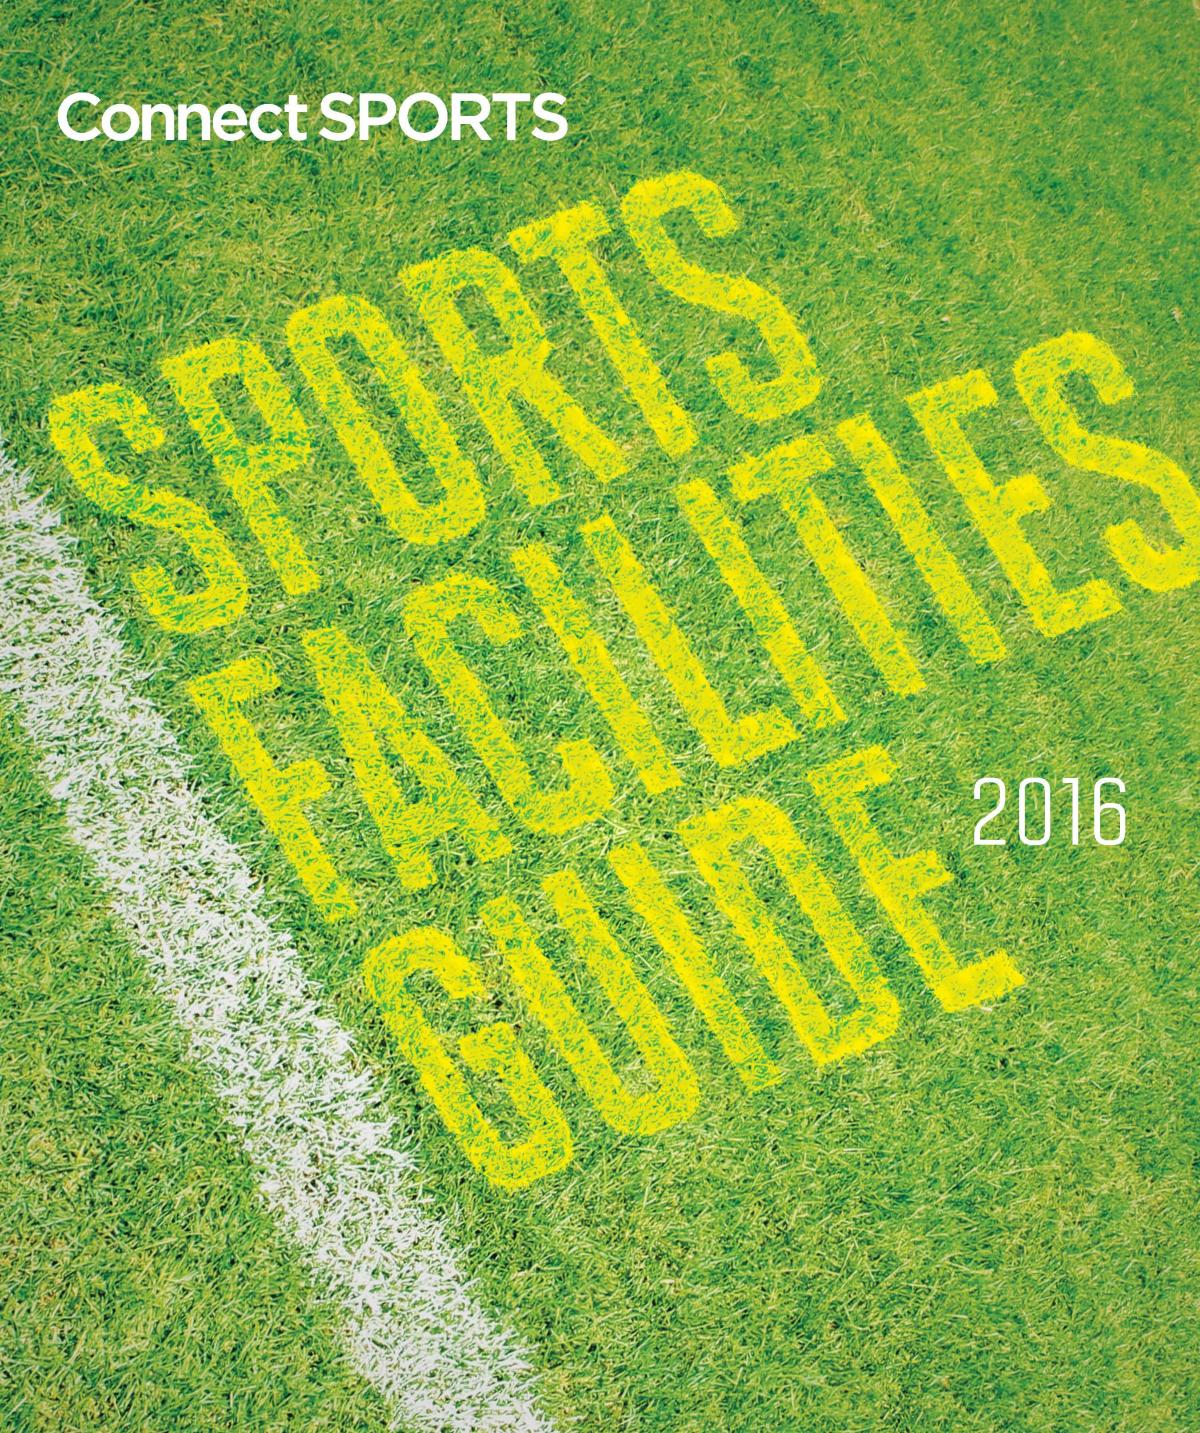 Sports Facilities Guide 2016